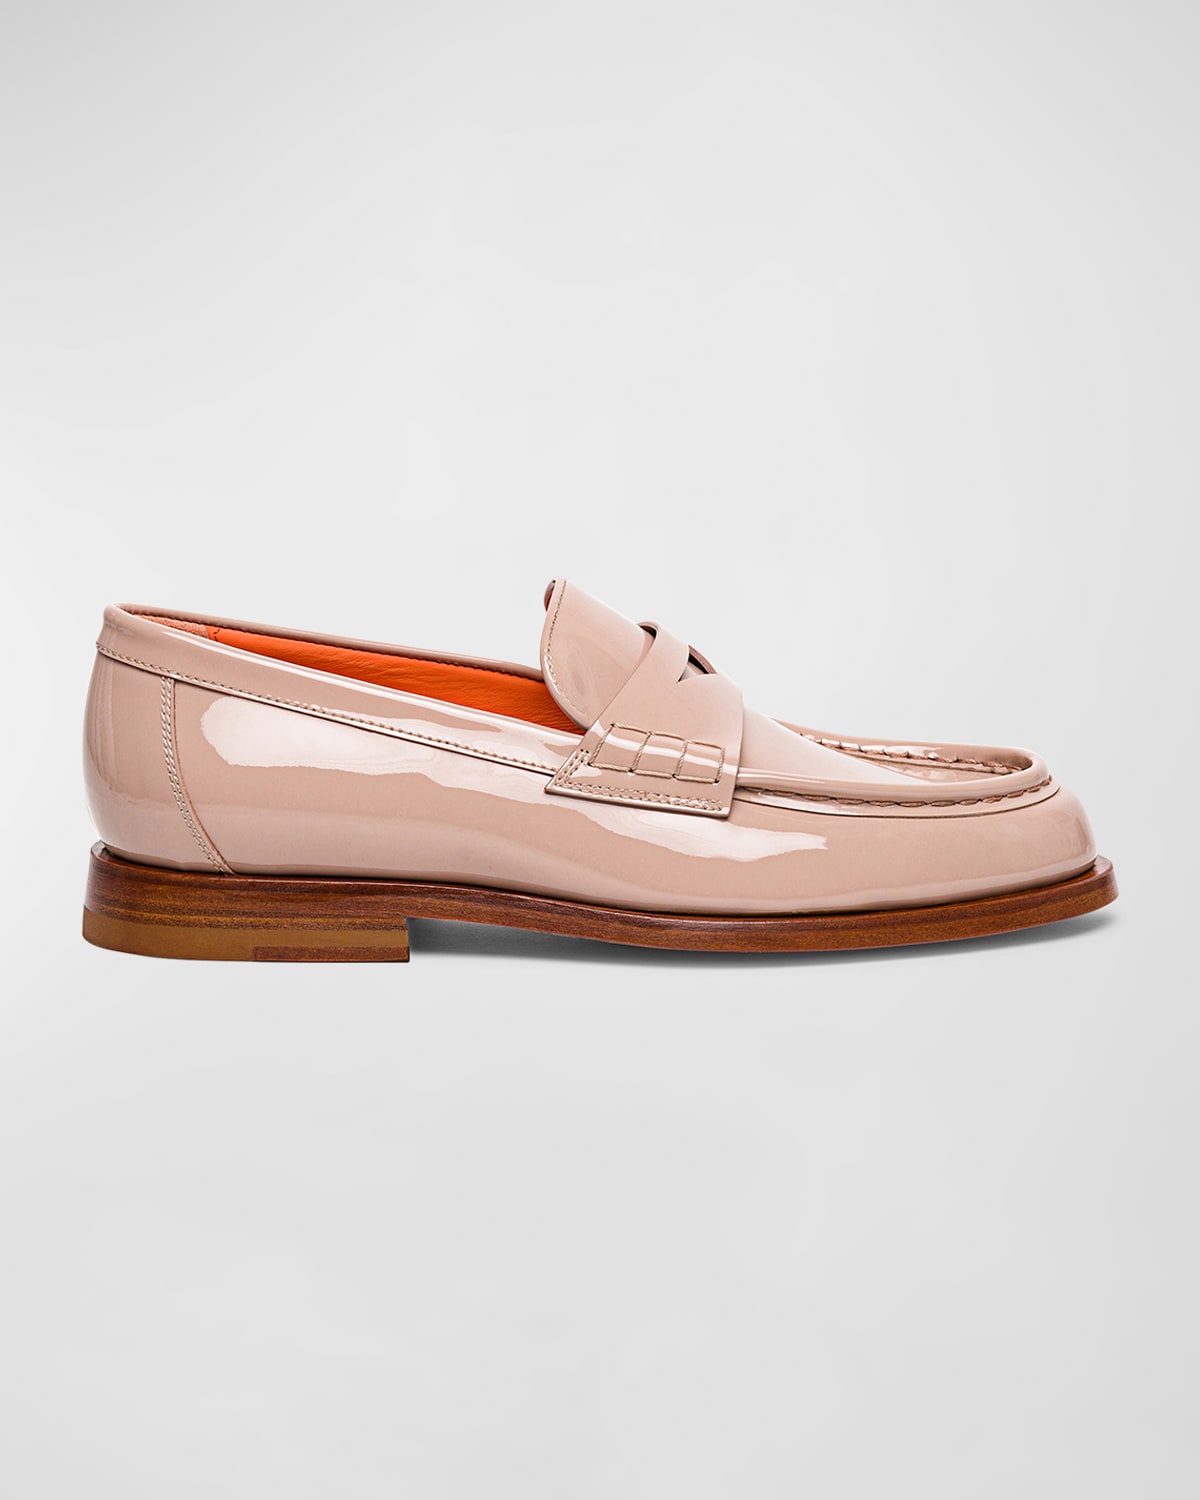 Santoni Airglow Patent Leather Penny Loafers In Nude